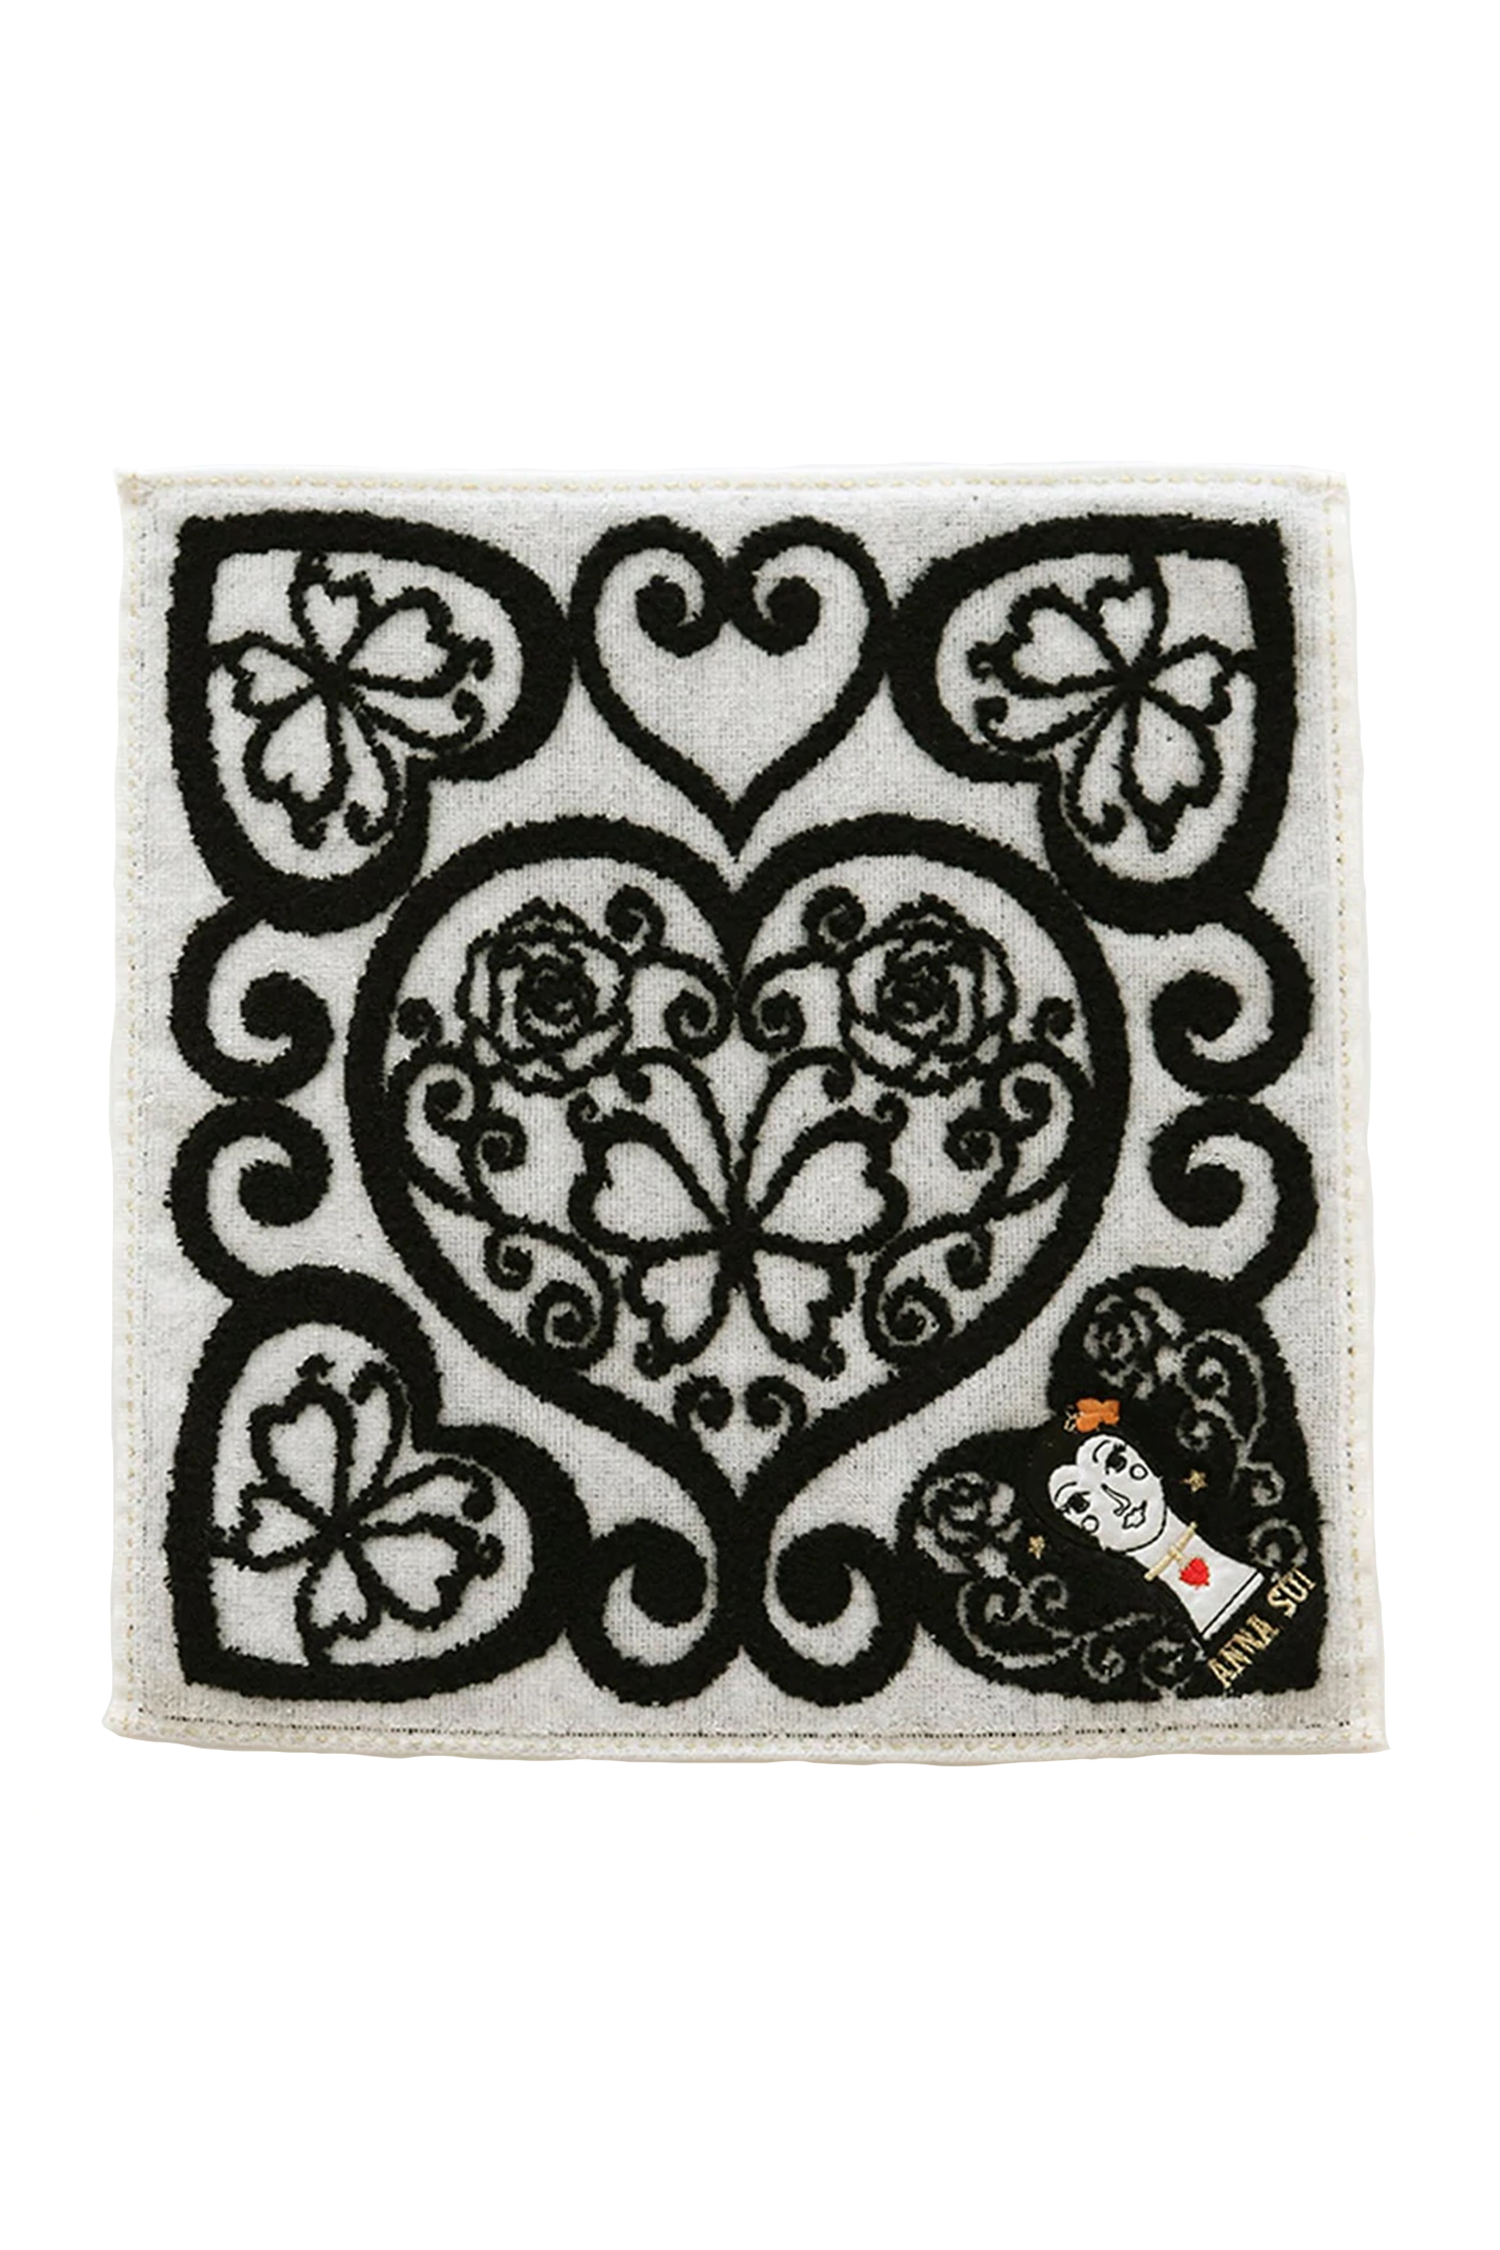 Dolly Head Washcloth, white, 4-embroidery black hearts in corners 1-center and Anna Sui’s doll in one